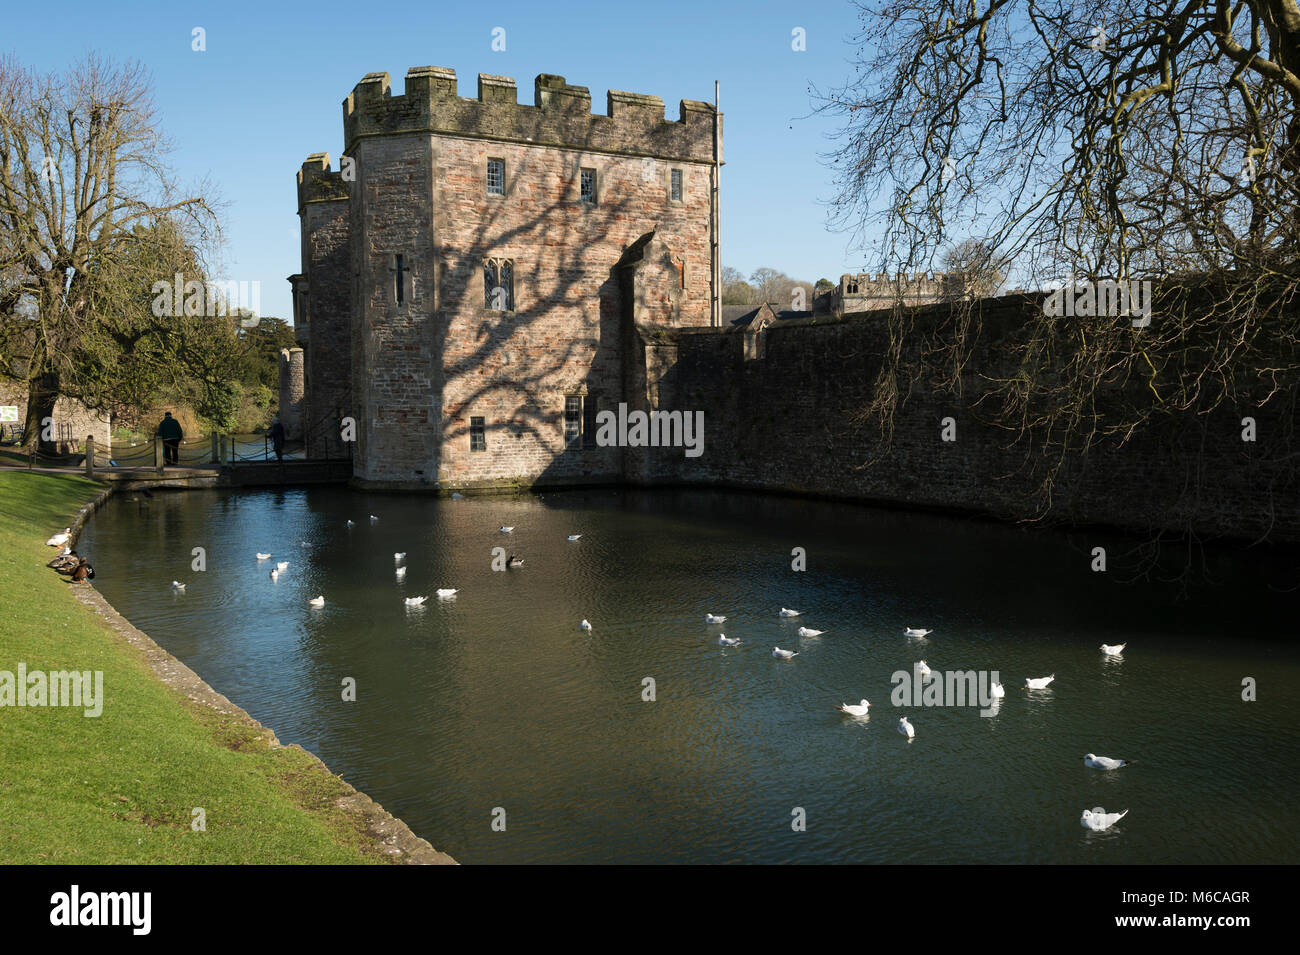 The Bishop's Palace, Wells and moat, Somerset, UK. Stock Photo